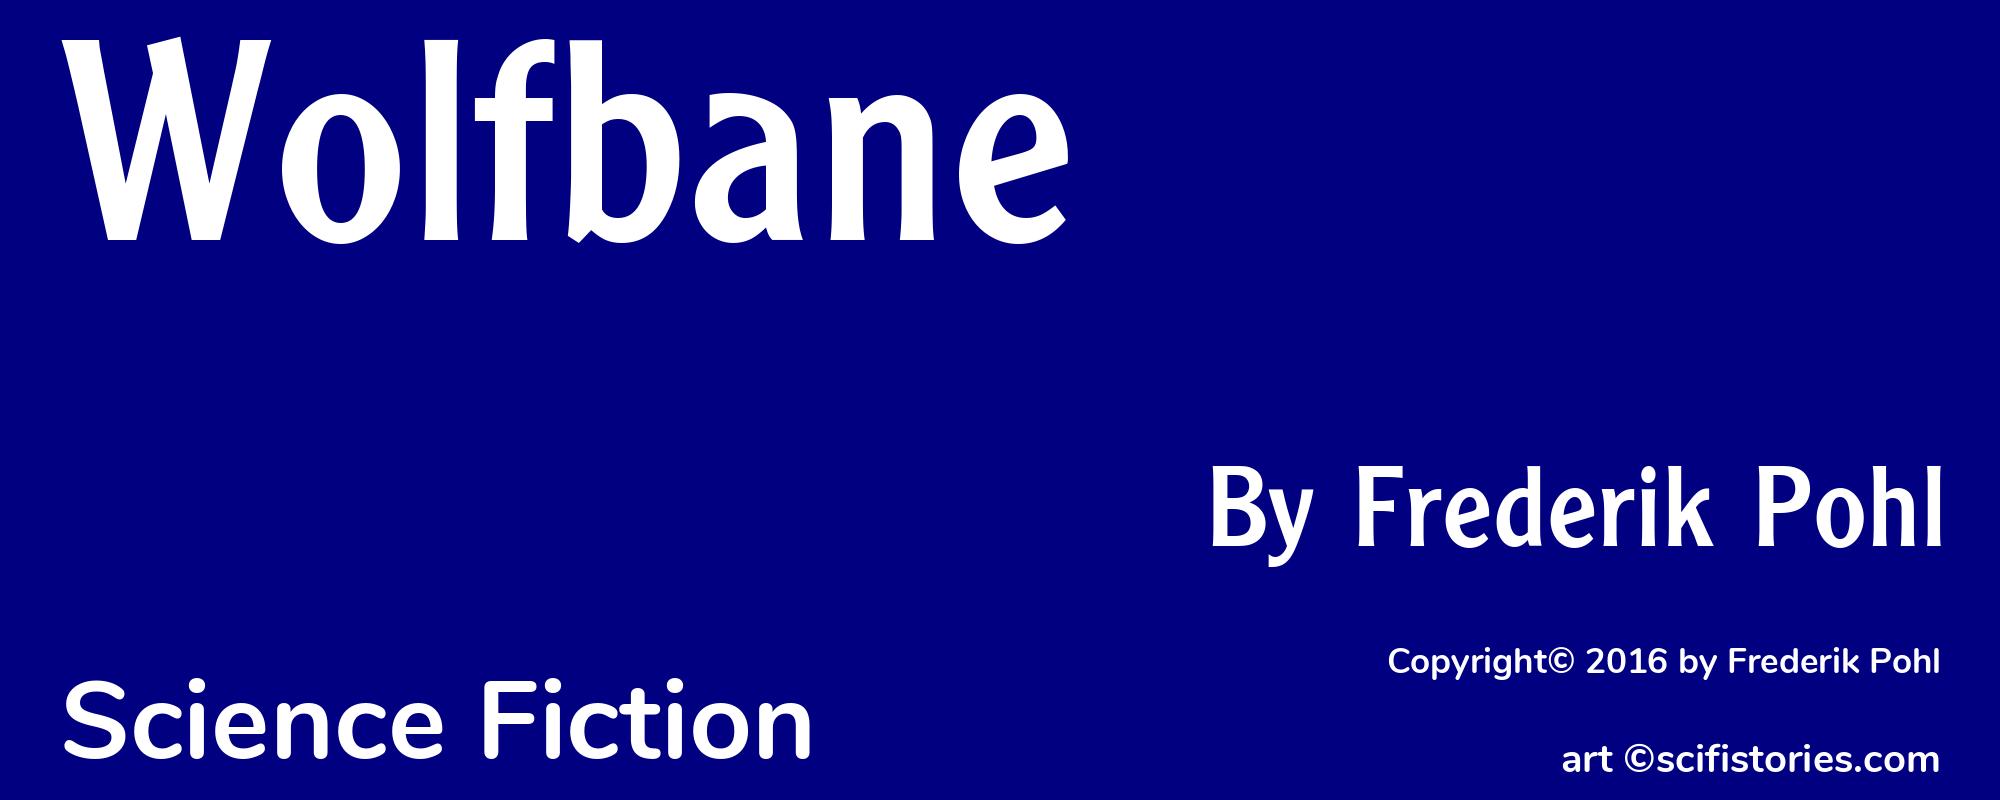 Wolfbane - Cover